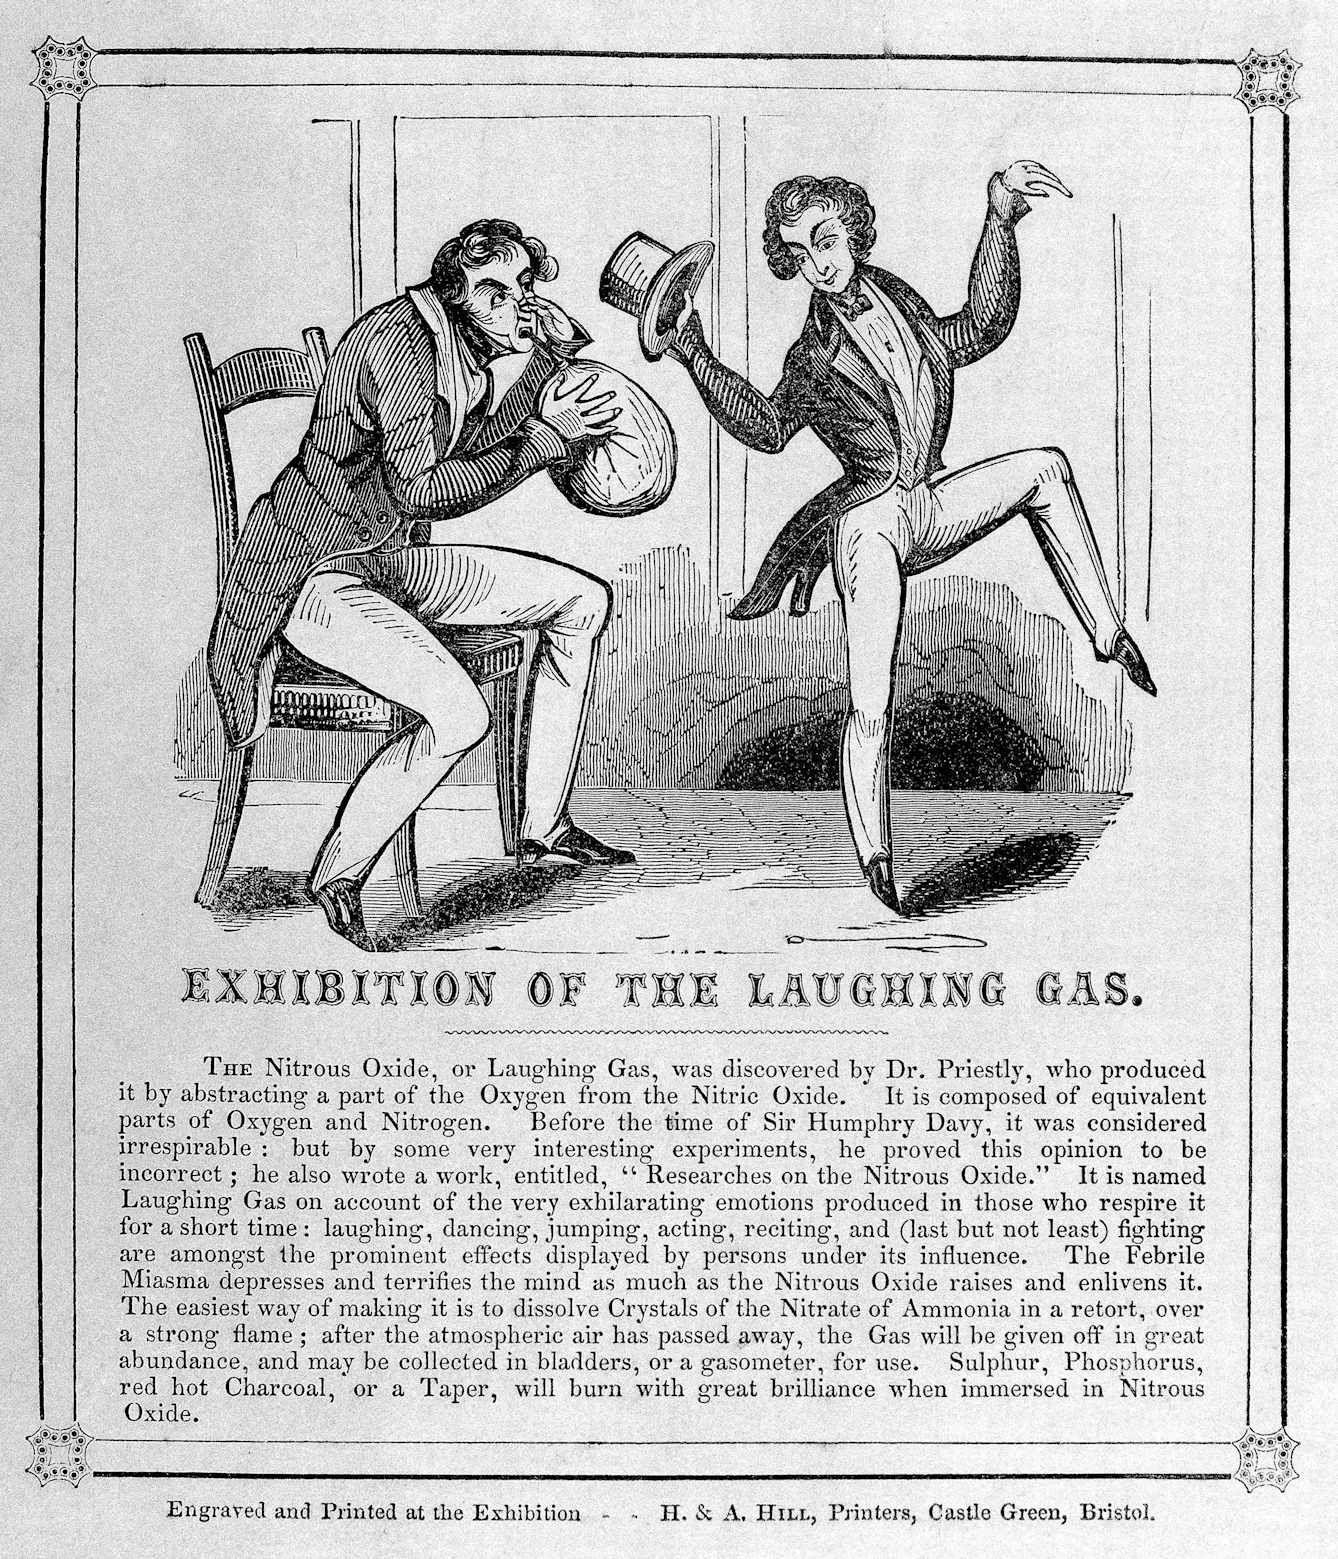 19th century printed engraving of two men in fine clothing. On esits on a chair inhaling gas from a baloon, the other is dancing on one leg while holding his top hat in his right hand,